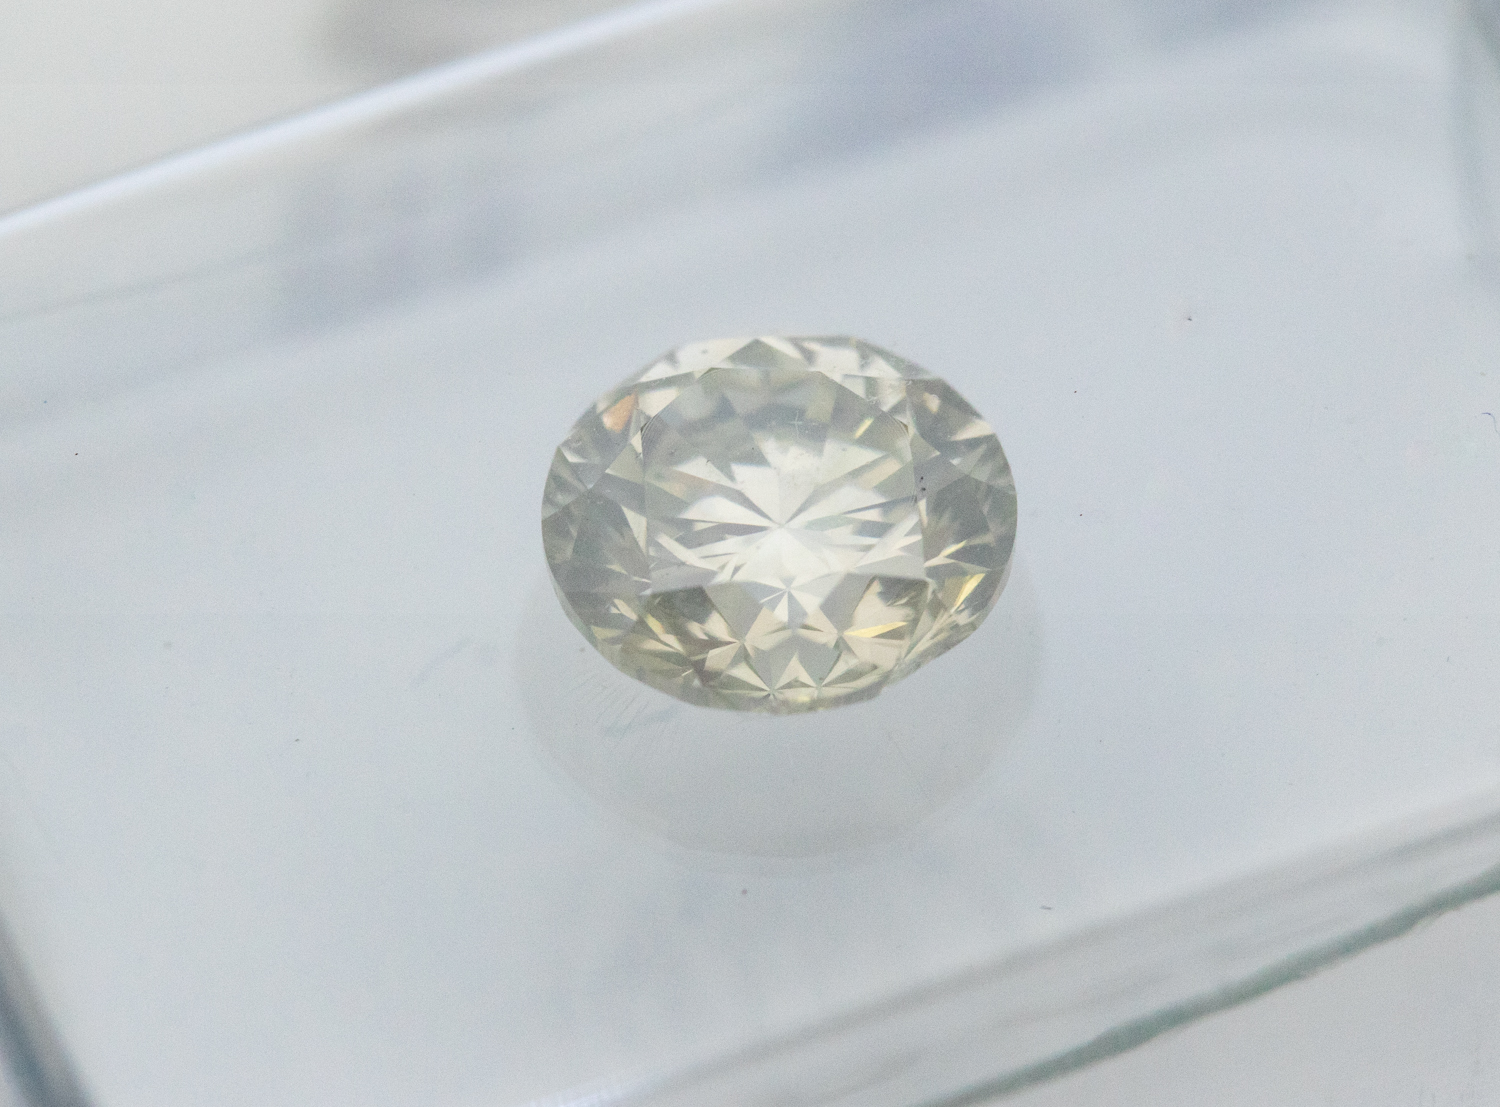 Certificated security sealed unmounted RBC diamond weight approx 0.90ct. assessed clarity SI2, - Image 2 of 3